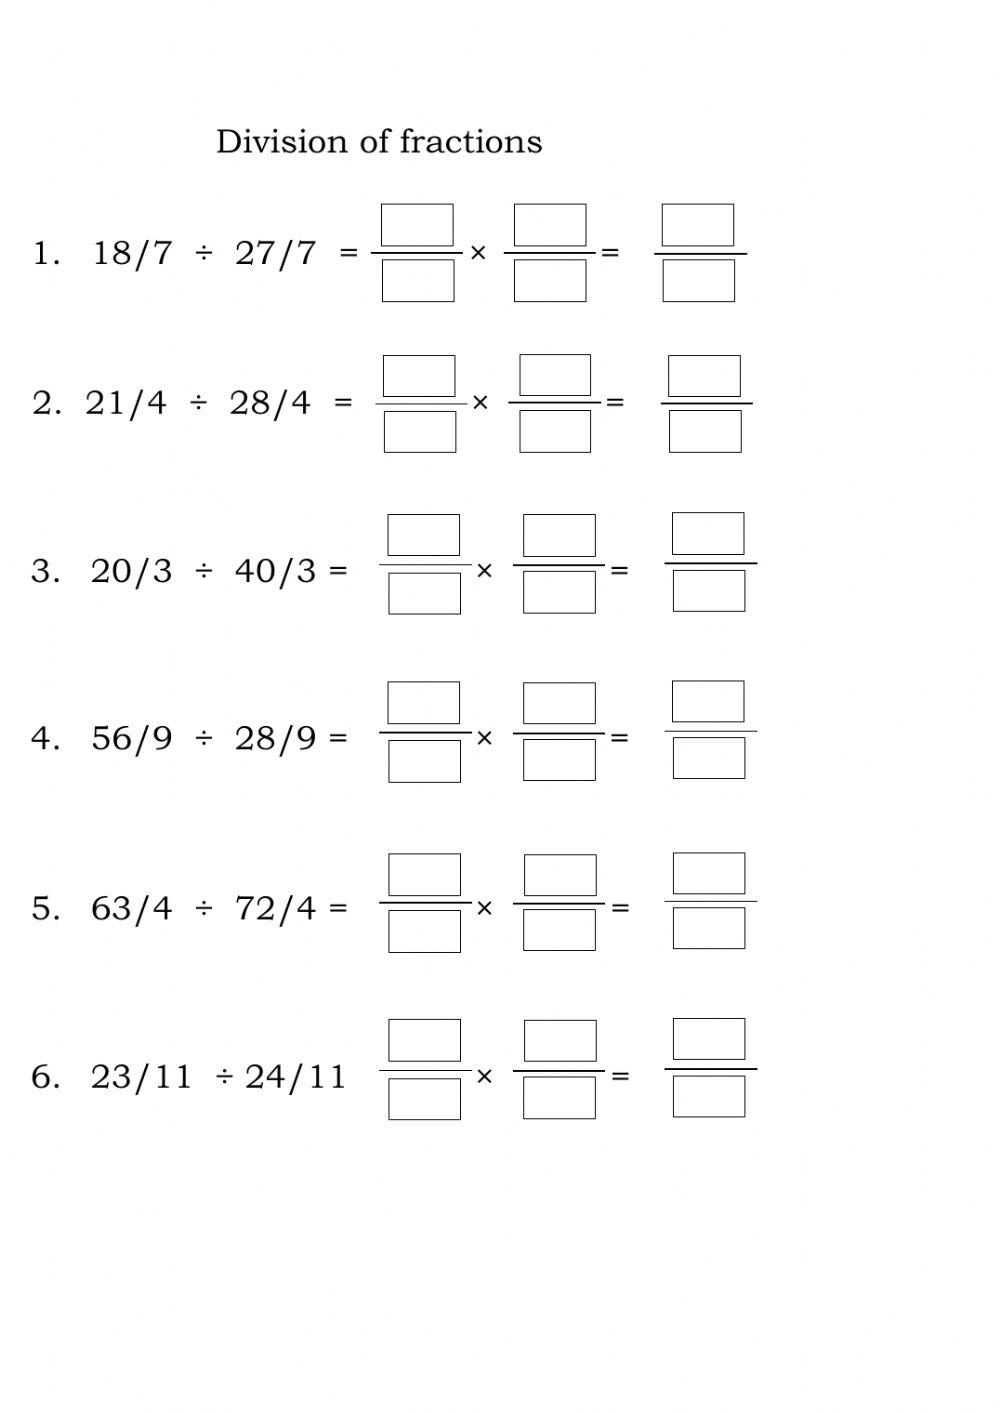 Division of like fractions